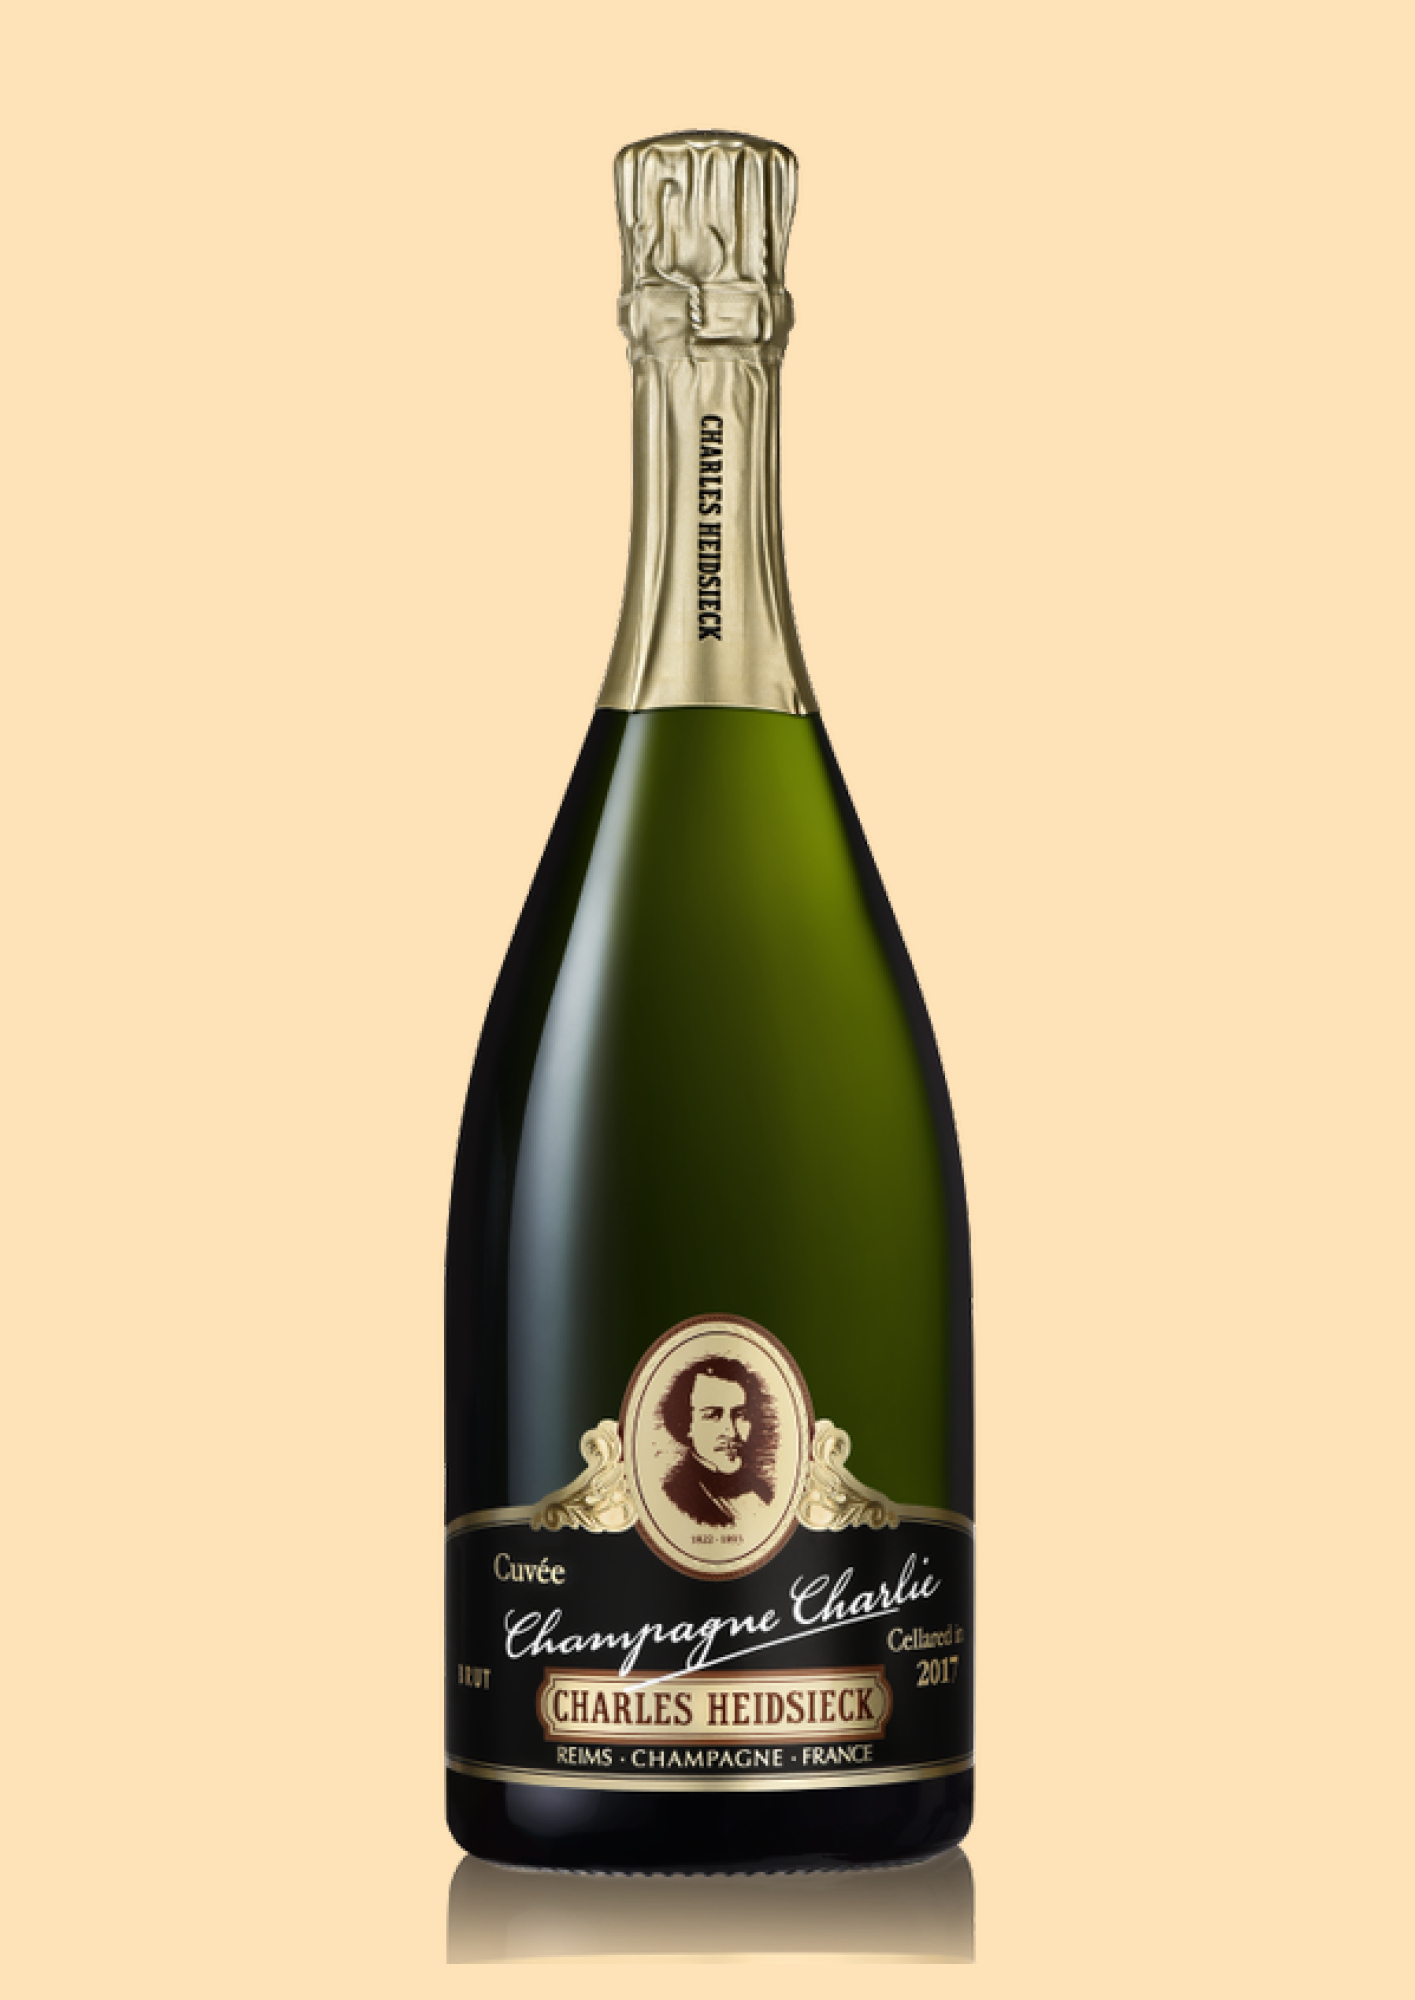 The new Champagne Charlie is the first from Charles Heidsieck in 37 years